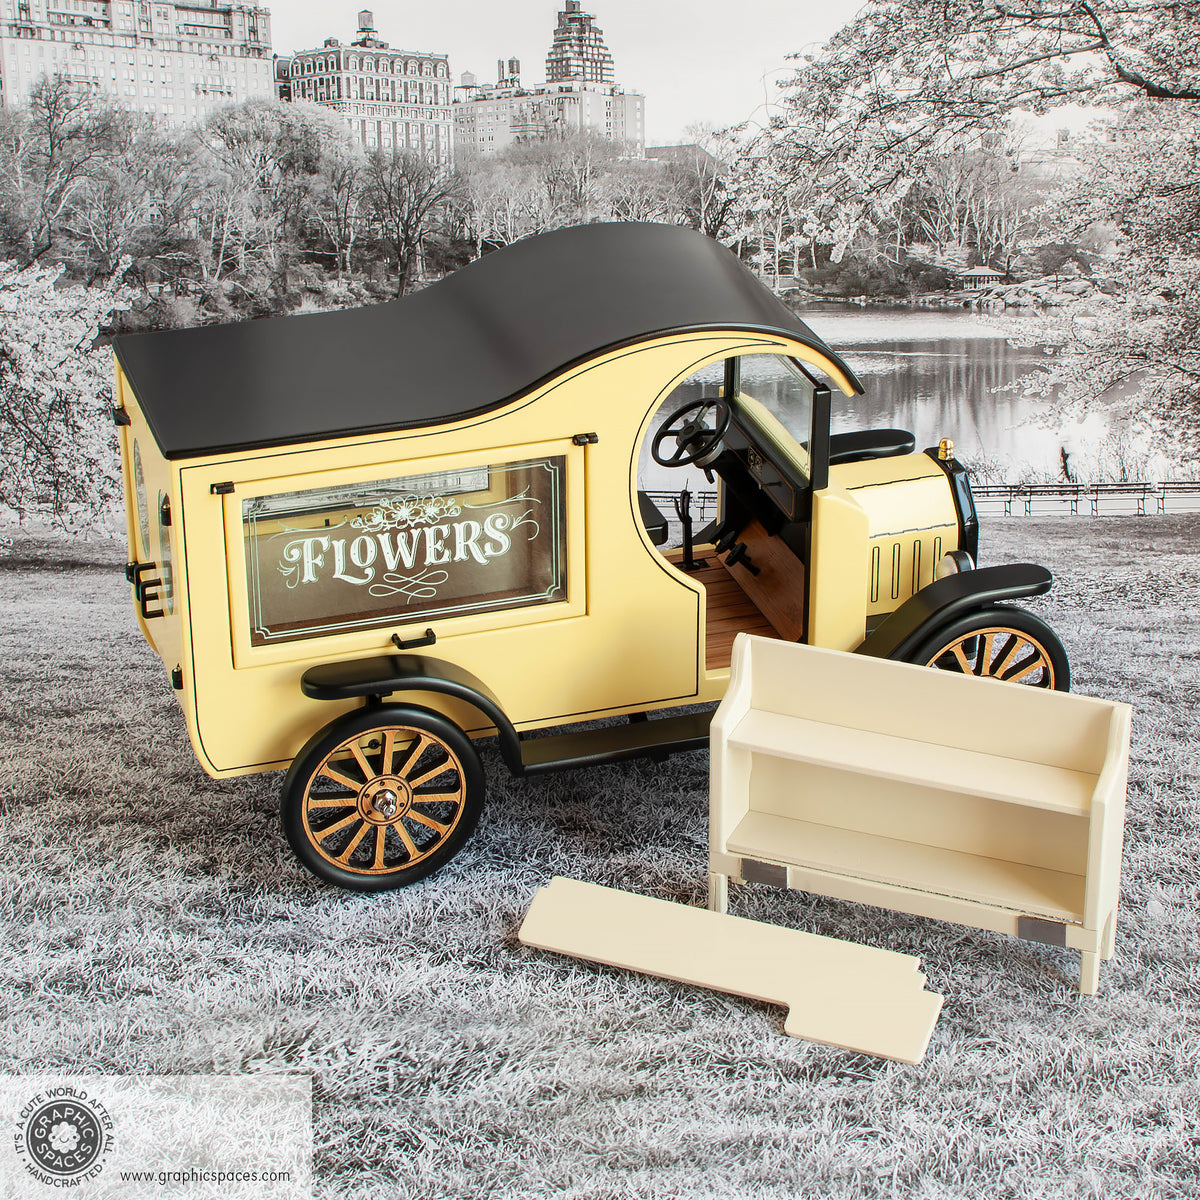 1:12 Scale Room Box Yellow Flower Shop Truck Model T C Cab. Passenger side view showing Counter and Shelf options. 